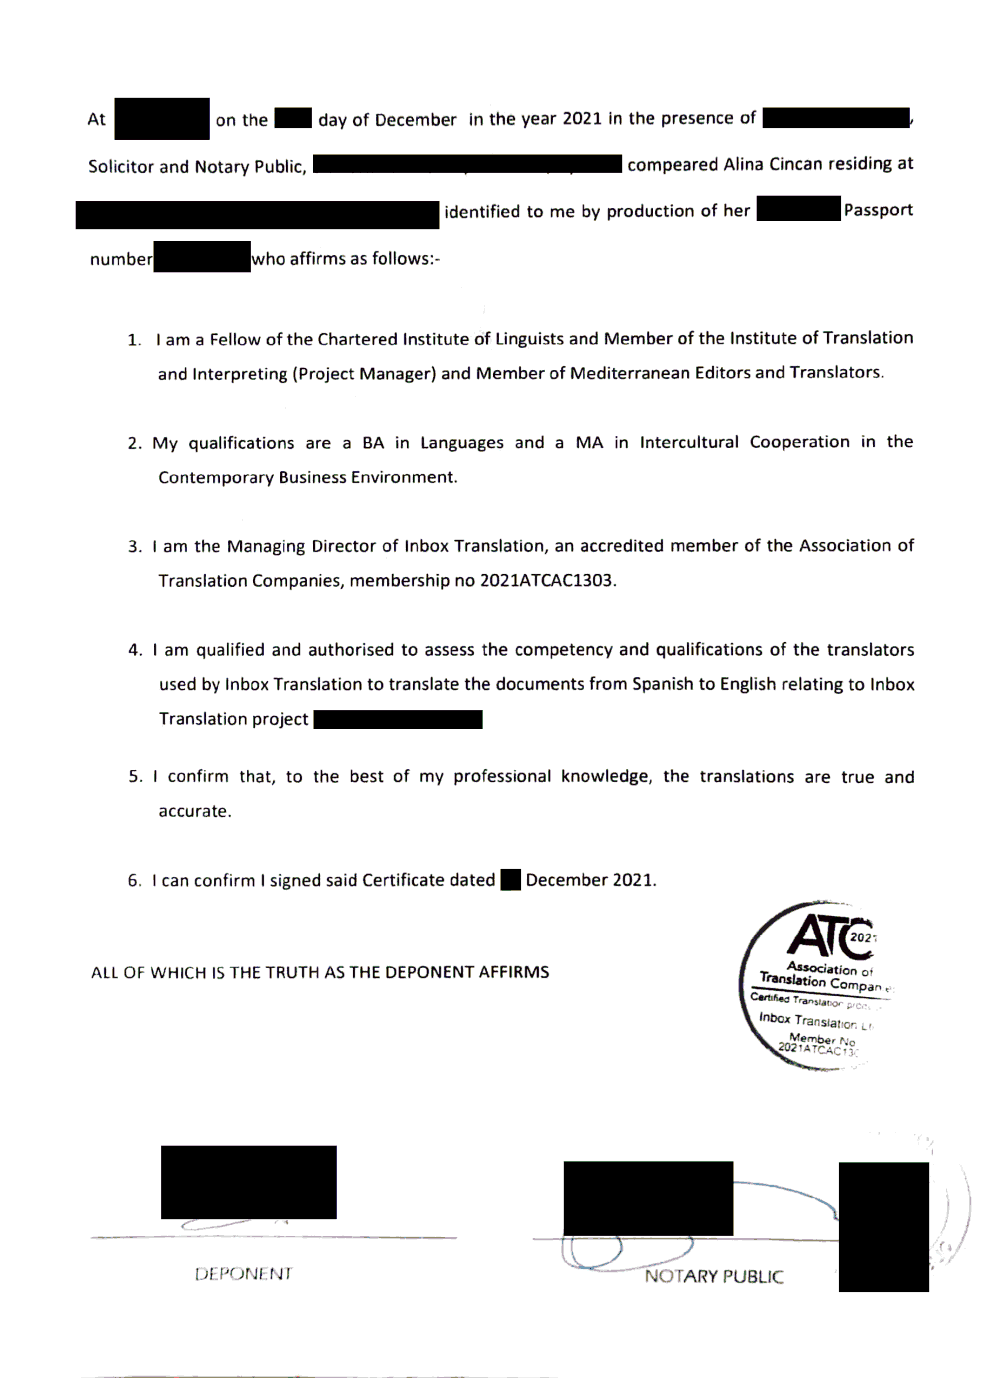 Sample of an officially notarised translation certificate letter